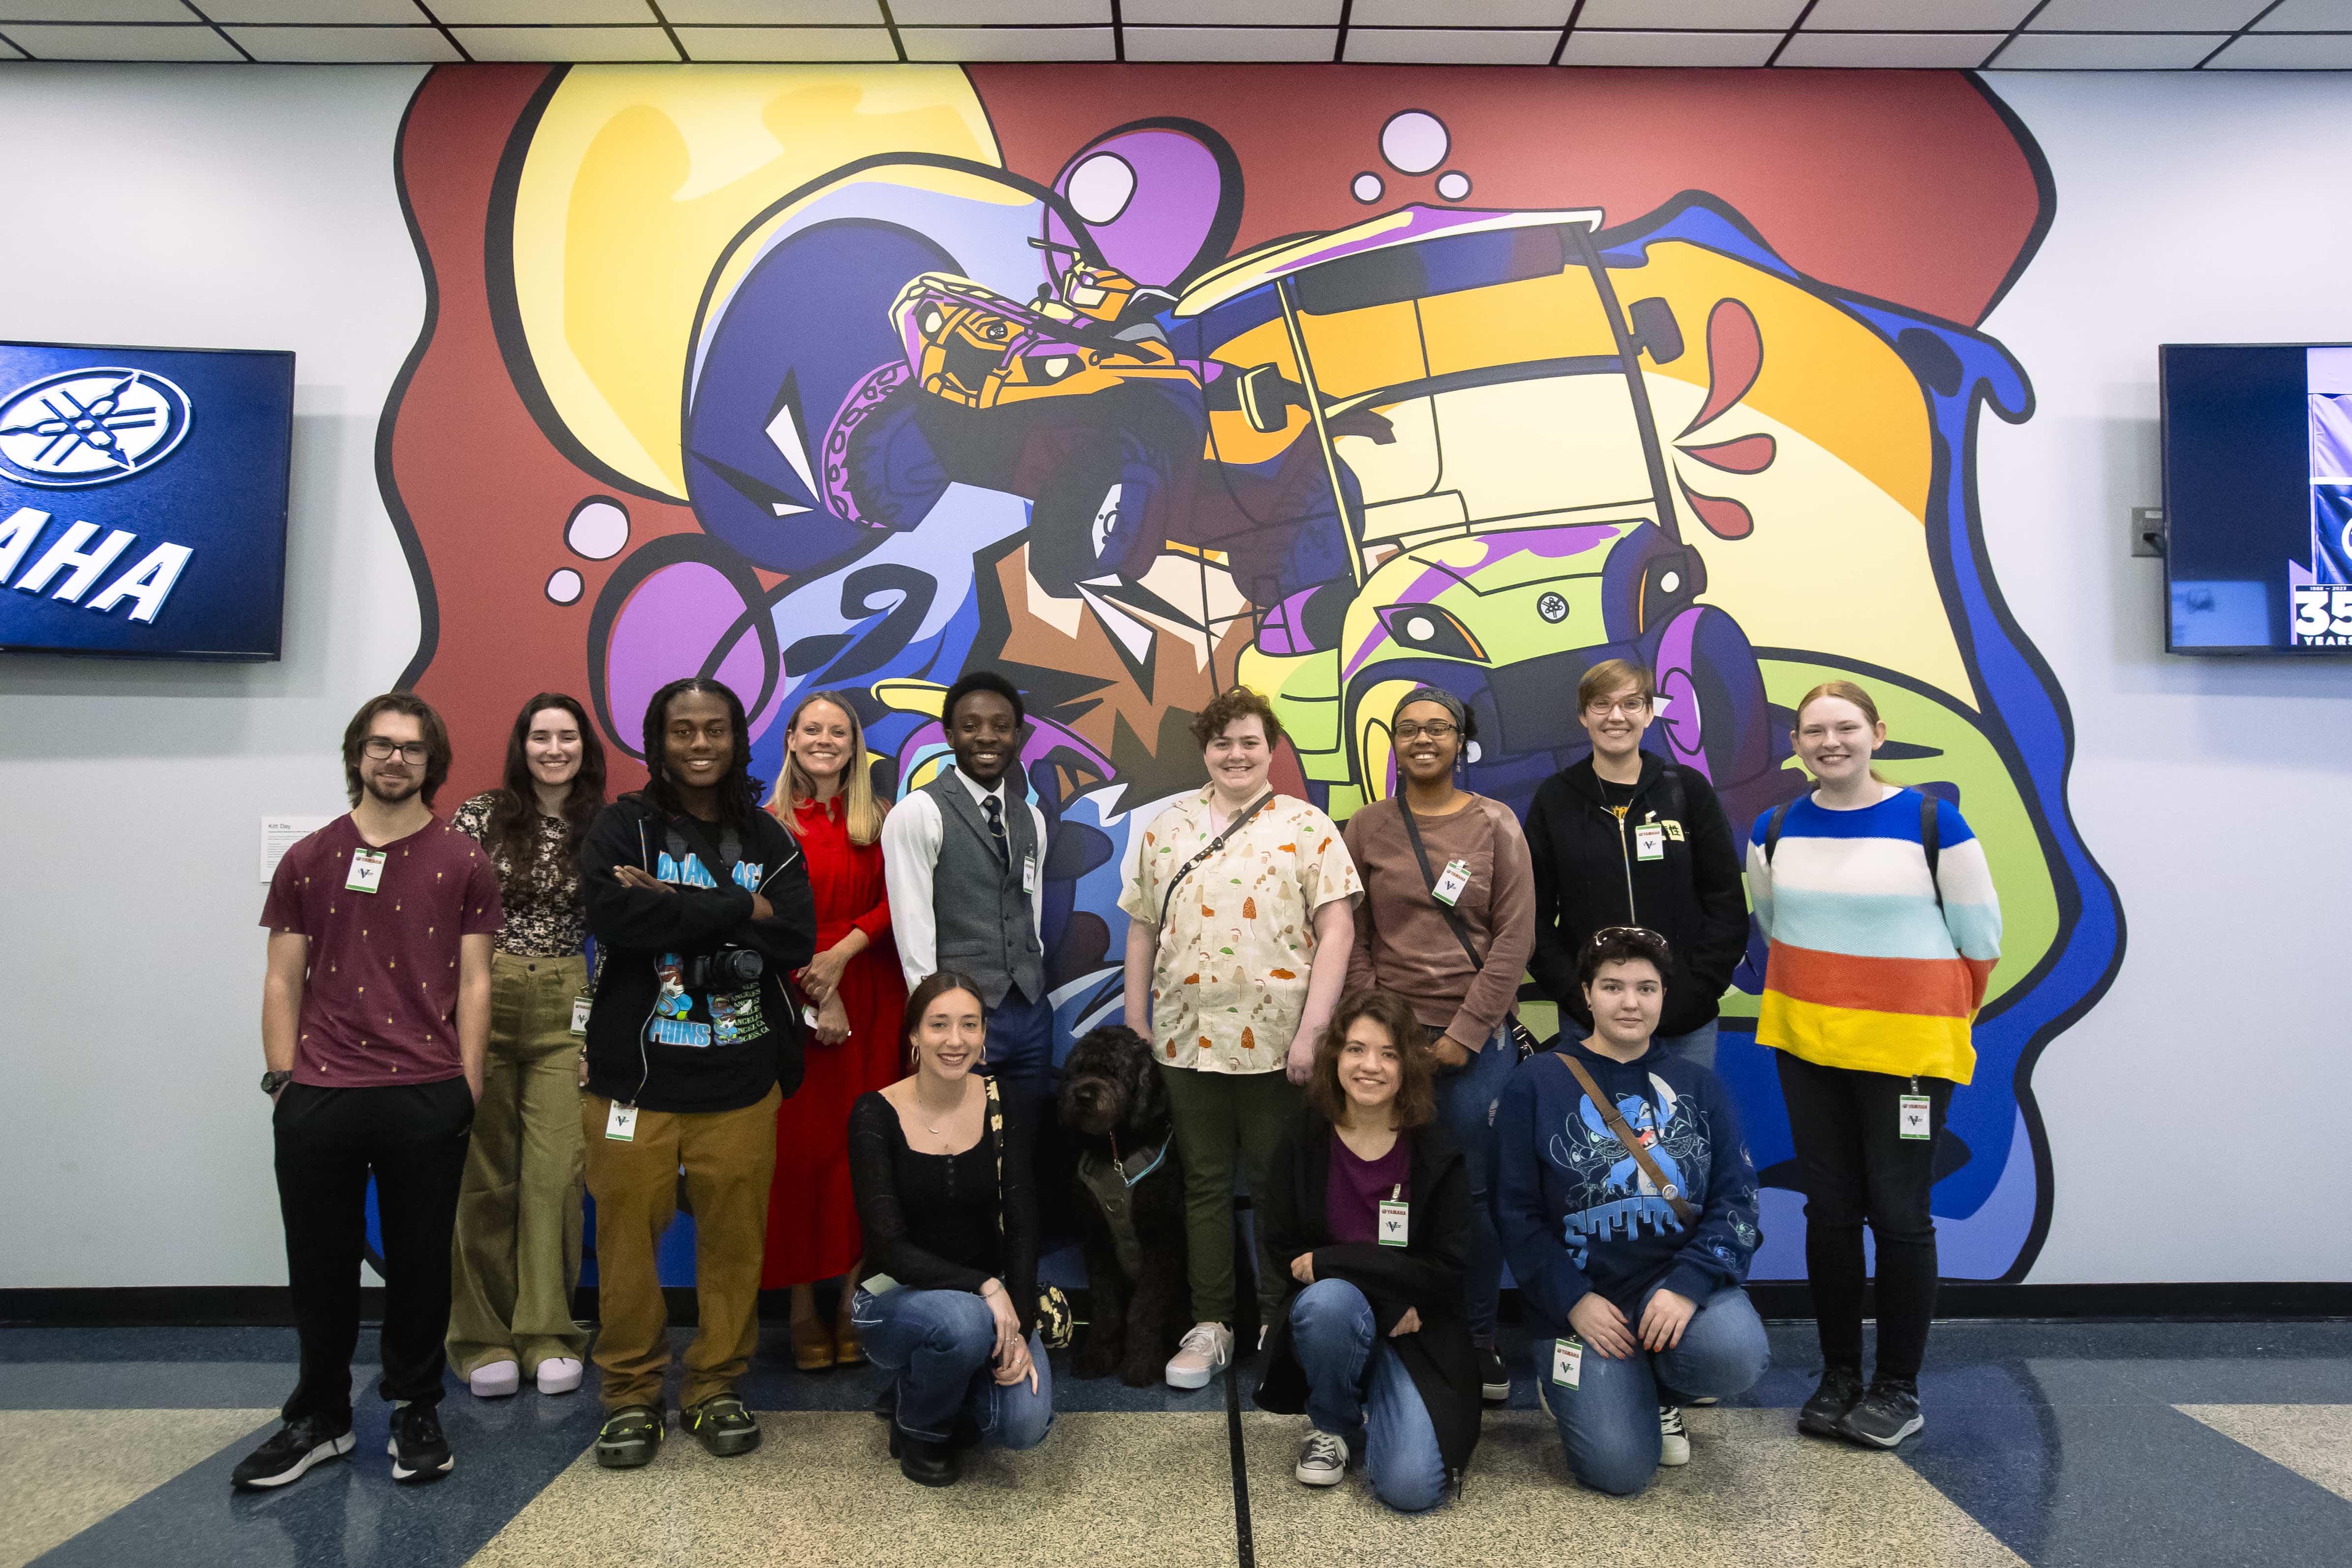 Art students standing in front of the newly painted Yamaha mural in Newnan.